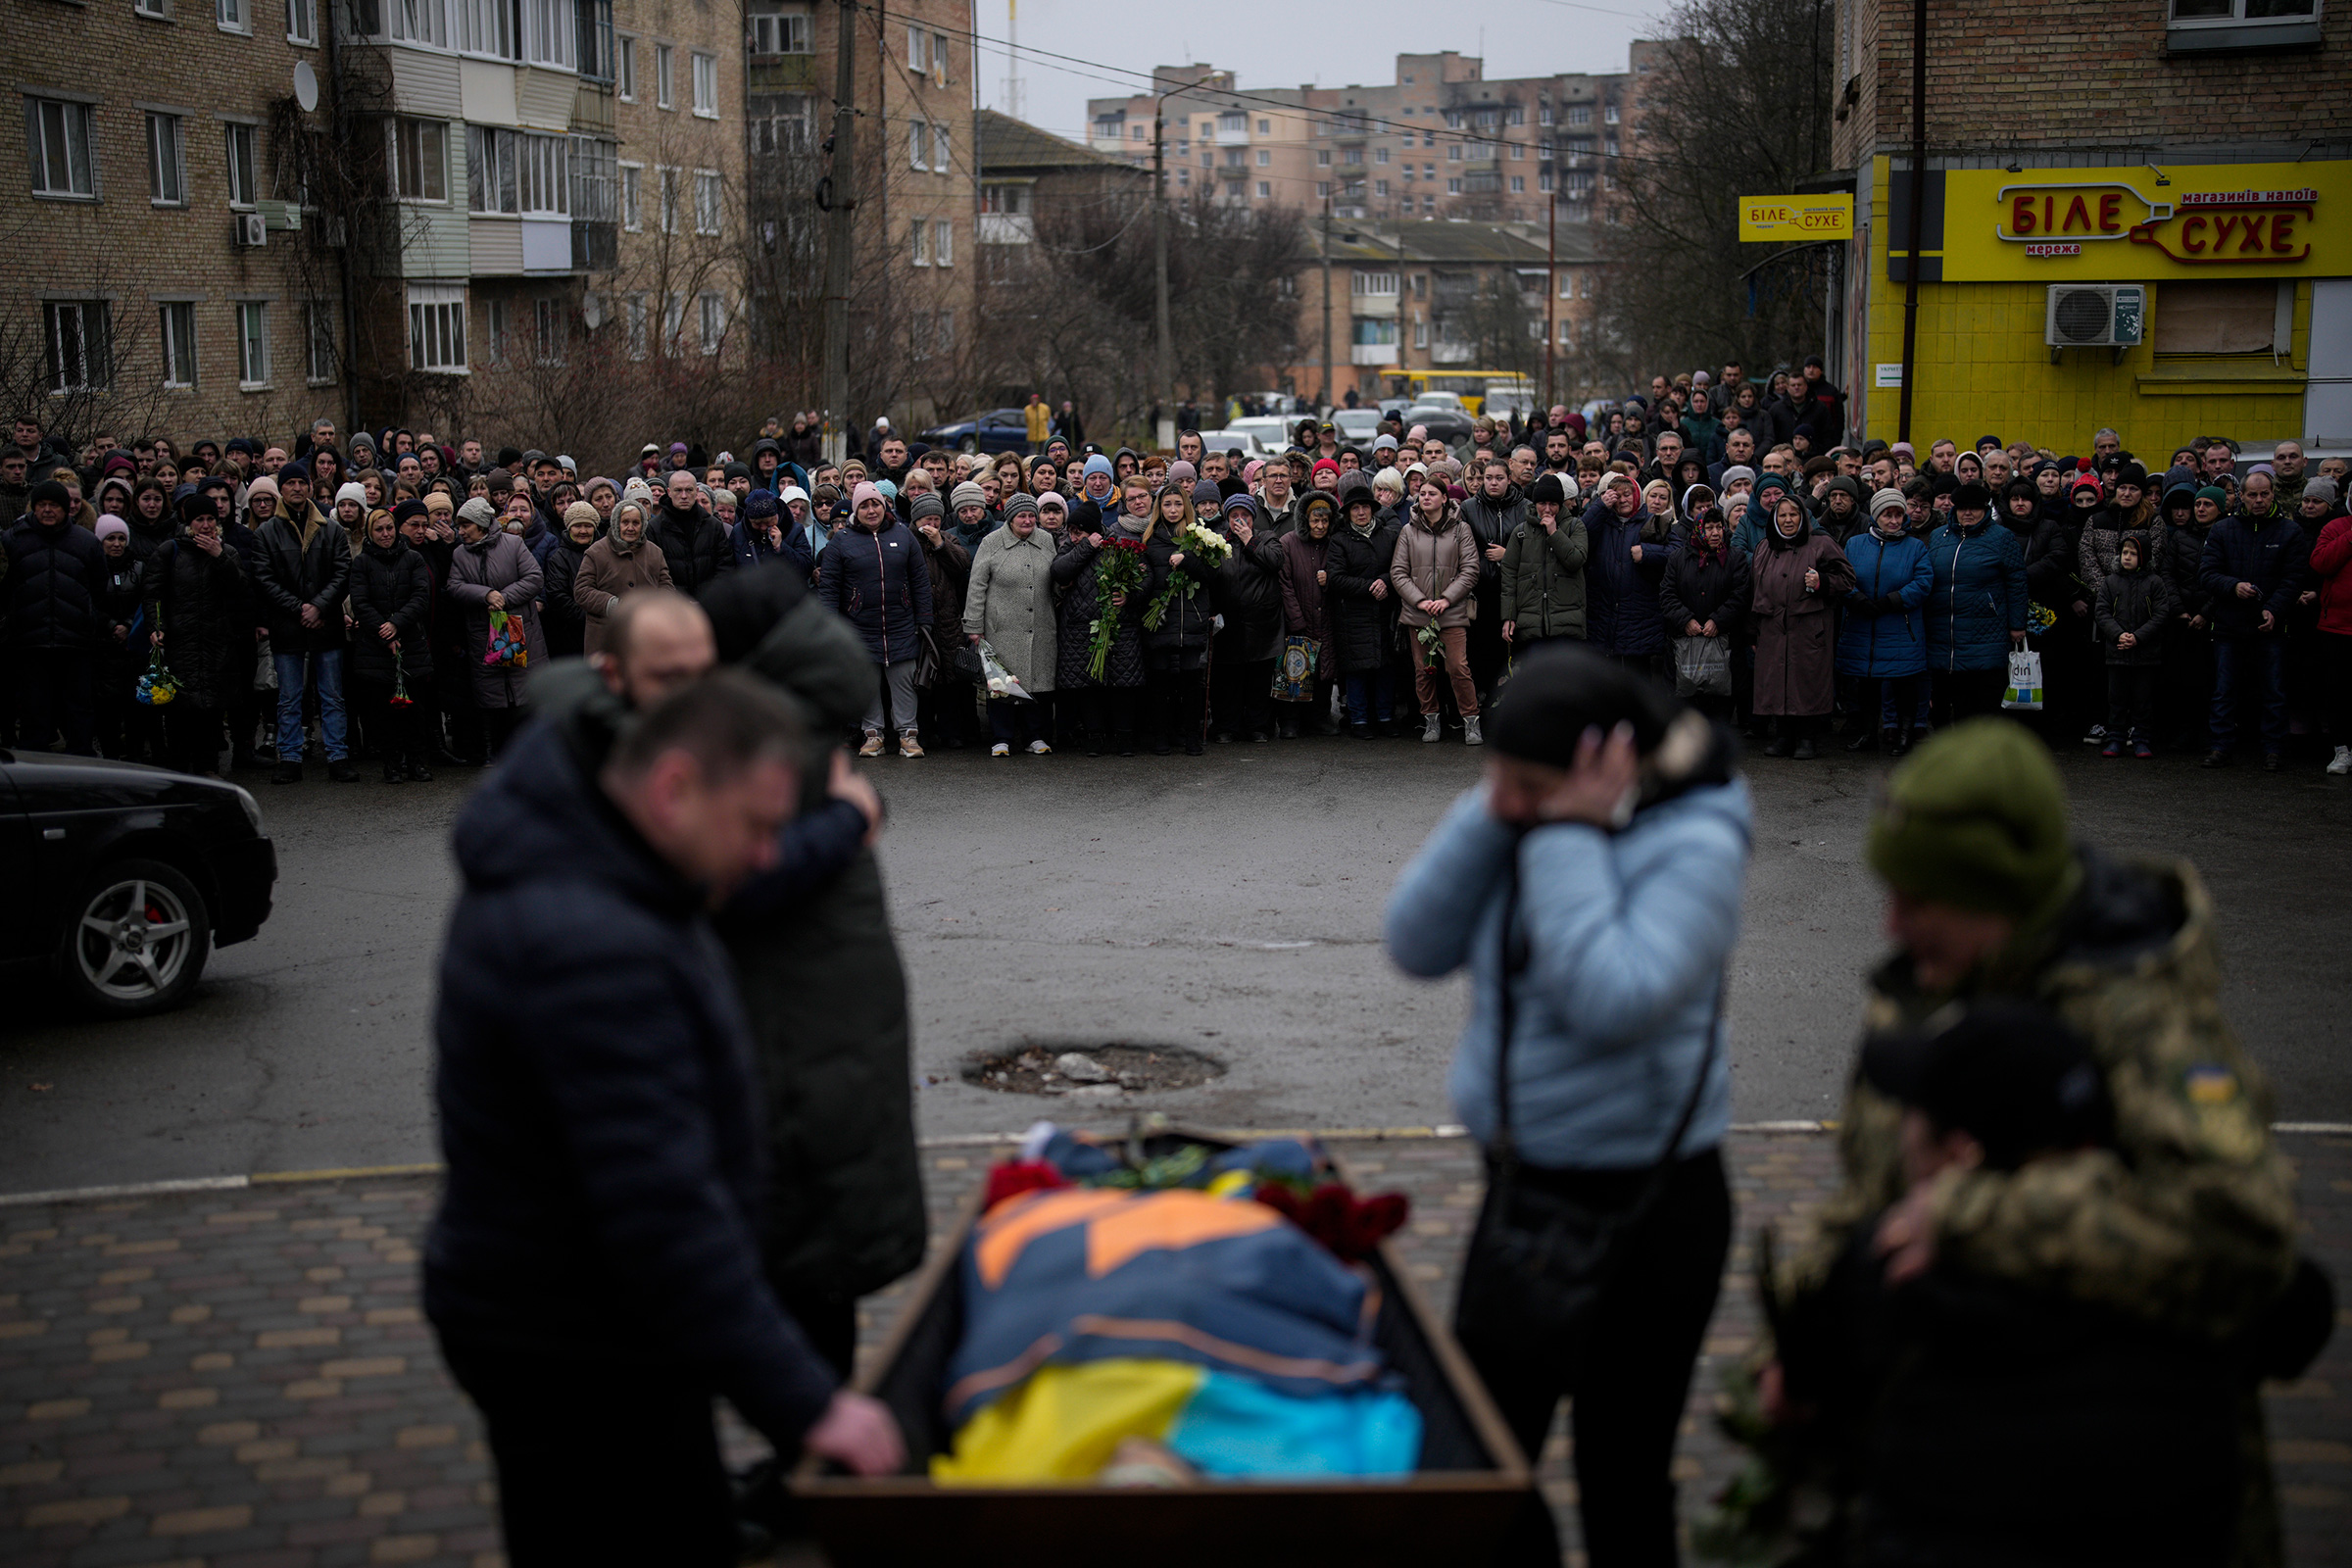 Bucha relatives gather to mourn the body of Oleksiy Zavadskyi, a Ukrainian serviceman who died in combat on Jan. 15 in Bakhmut, during his funeral in Bucha, Ukraine, Jan. 19, 2023. (Daniel Cole—AP)